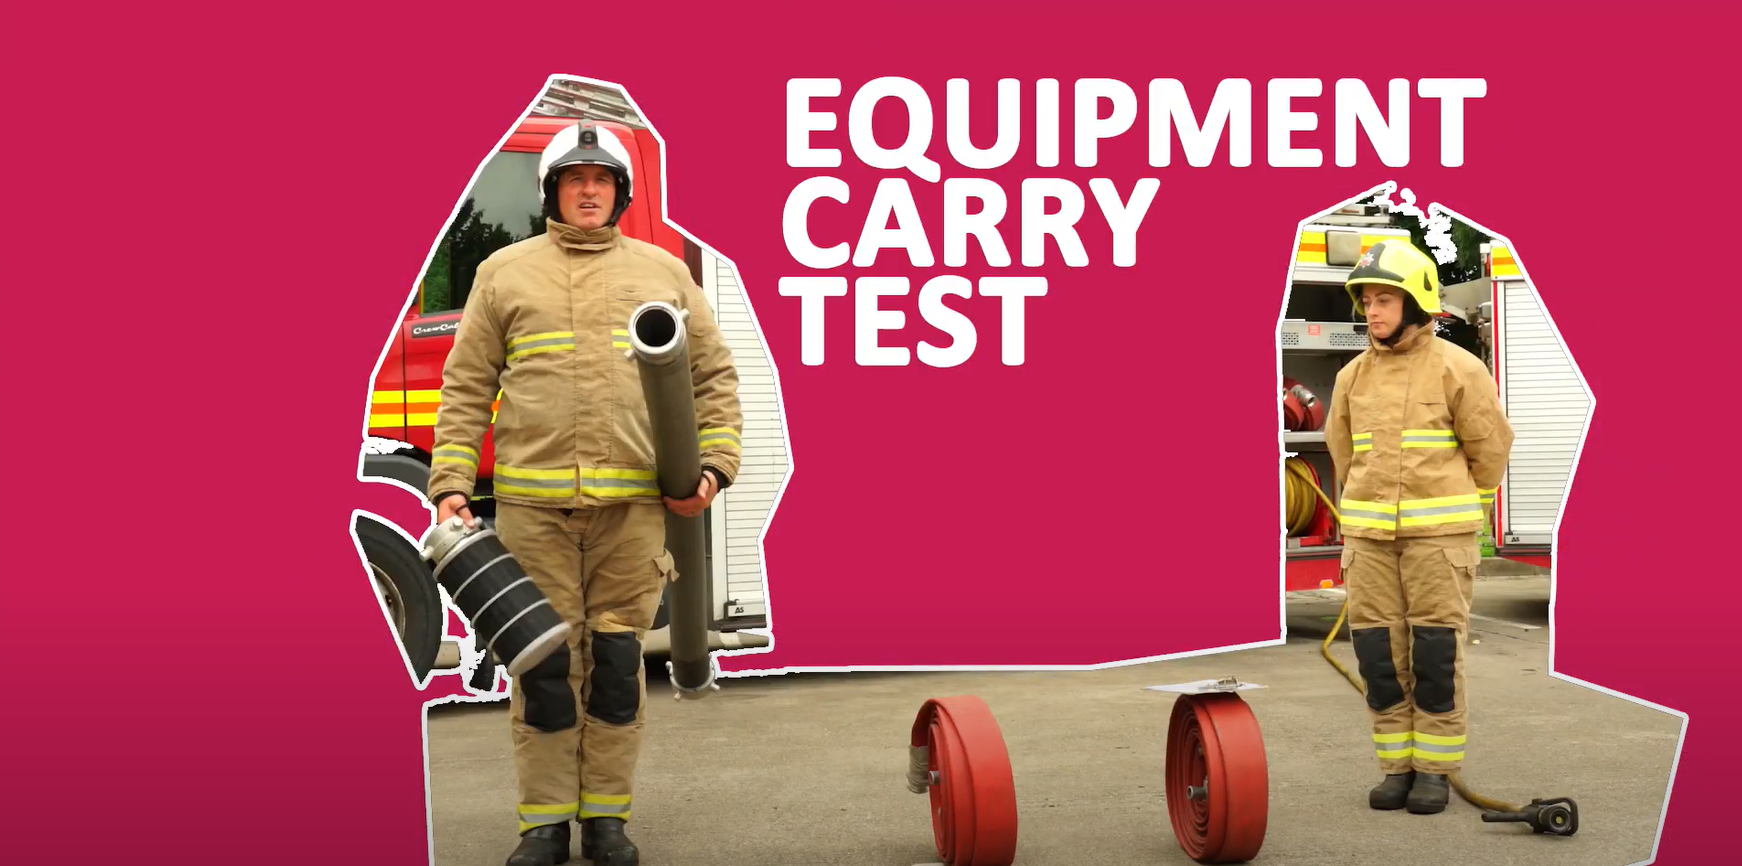 Equipment carry test